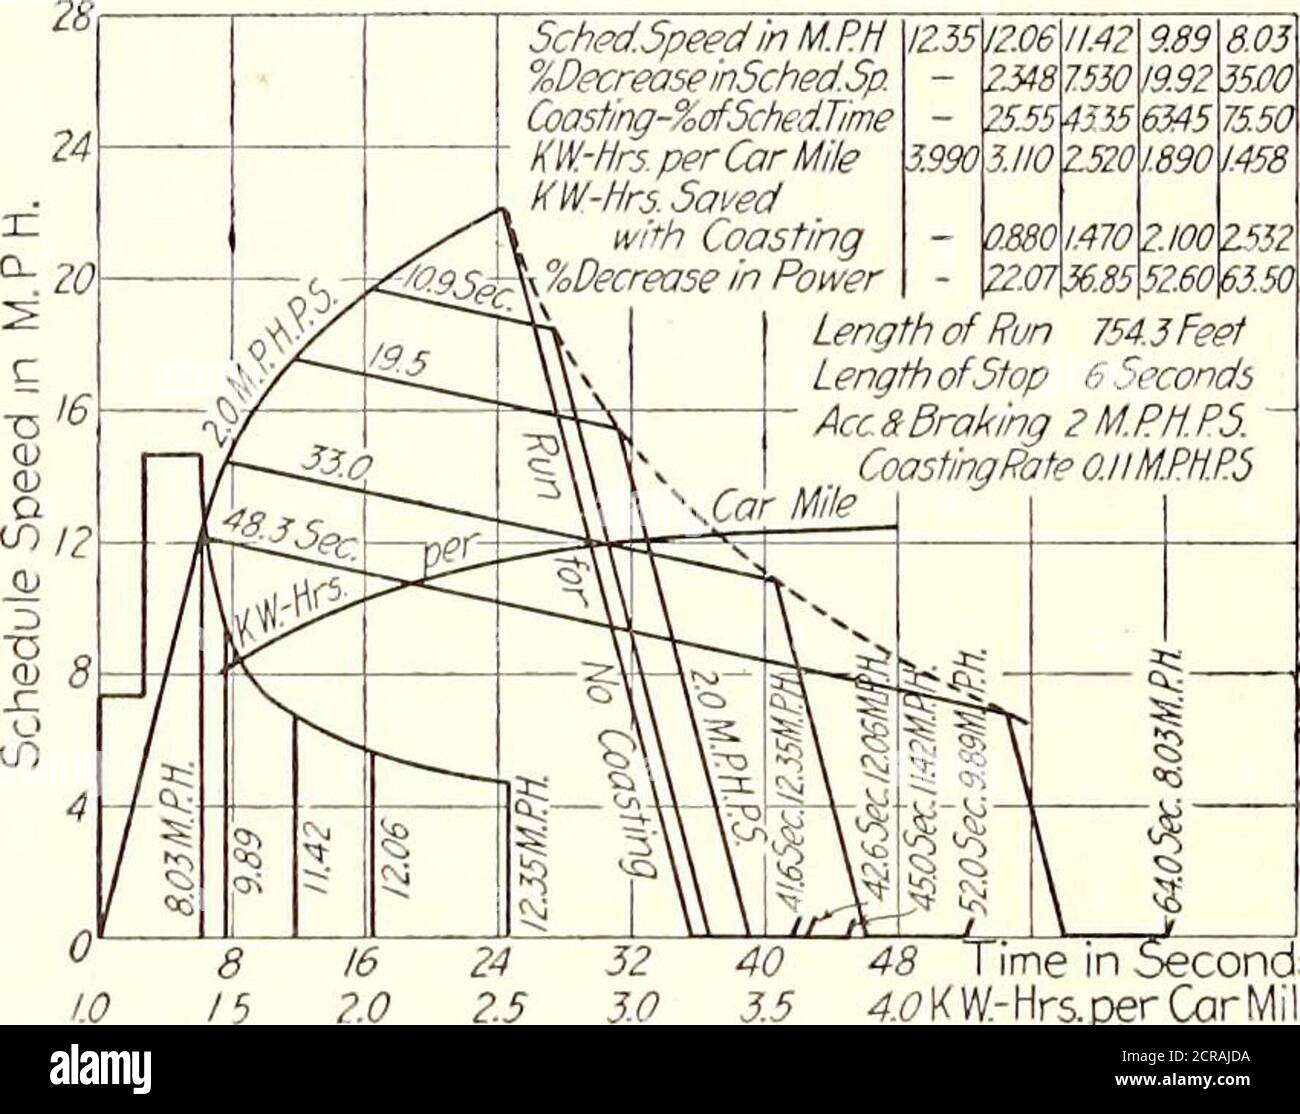 . Electric railway journal . 25- 96 Time in Seconds2tfKW-Hrs.perCarMile Fig. 9—Diagrams Showing Operating Conditionsfor Several Schedule Speeds, with Three StopsPer Mile k too $ 60. AO 48 Ti me in Seconds3.5 4&lt;?KW-Hrs.perCorMile Fig. 10—Diagrams Showing Operating Conditionsfor Several Schedule Speeds, with Seven StopsPer Mile 175 150 J25o ^100i  o. 01 Q. E 50&lt;C 25 60 Time in Sec.250 KW-Hrs.oerCorMile Fig. 10—Diagrams Showing Operating ConditionsFor Several Schedule Speeds, with Five Stops PerMile Stock Photo